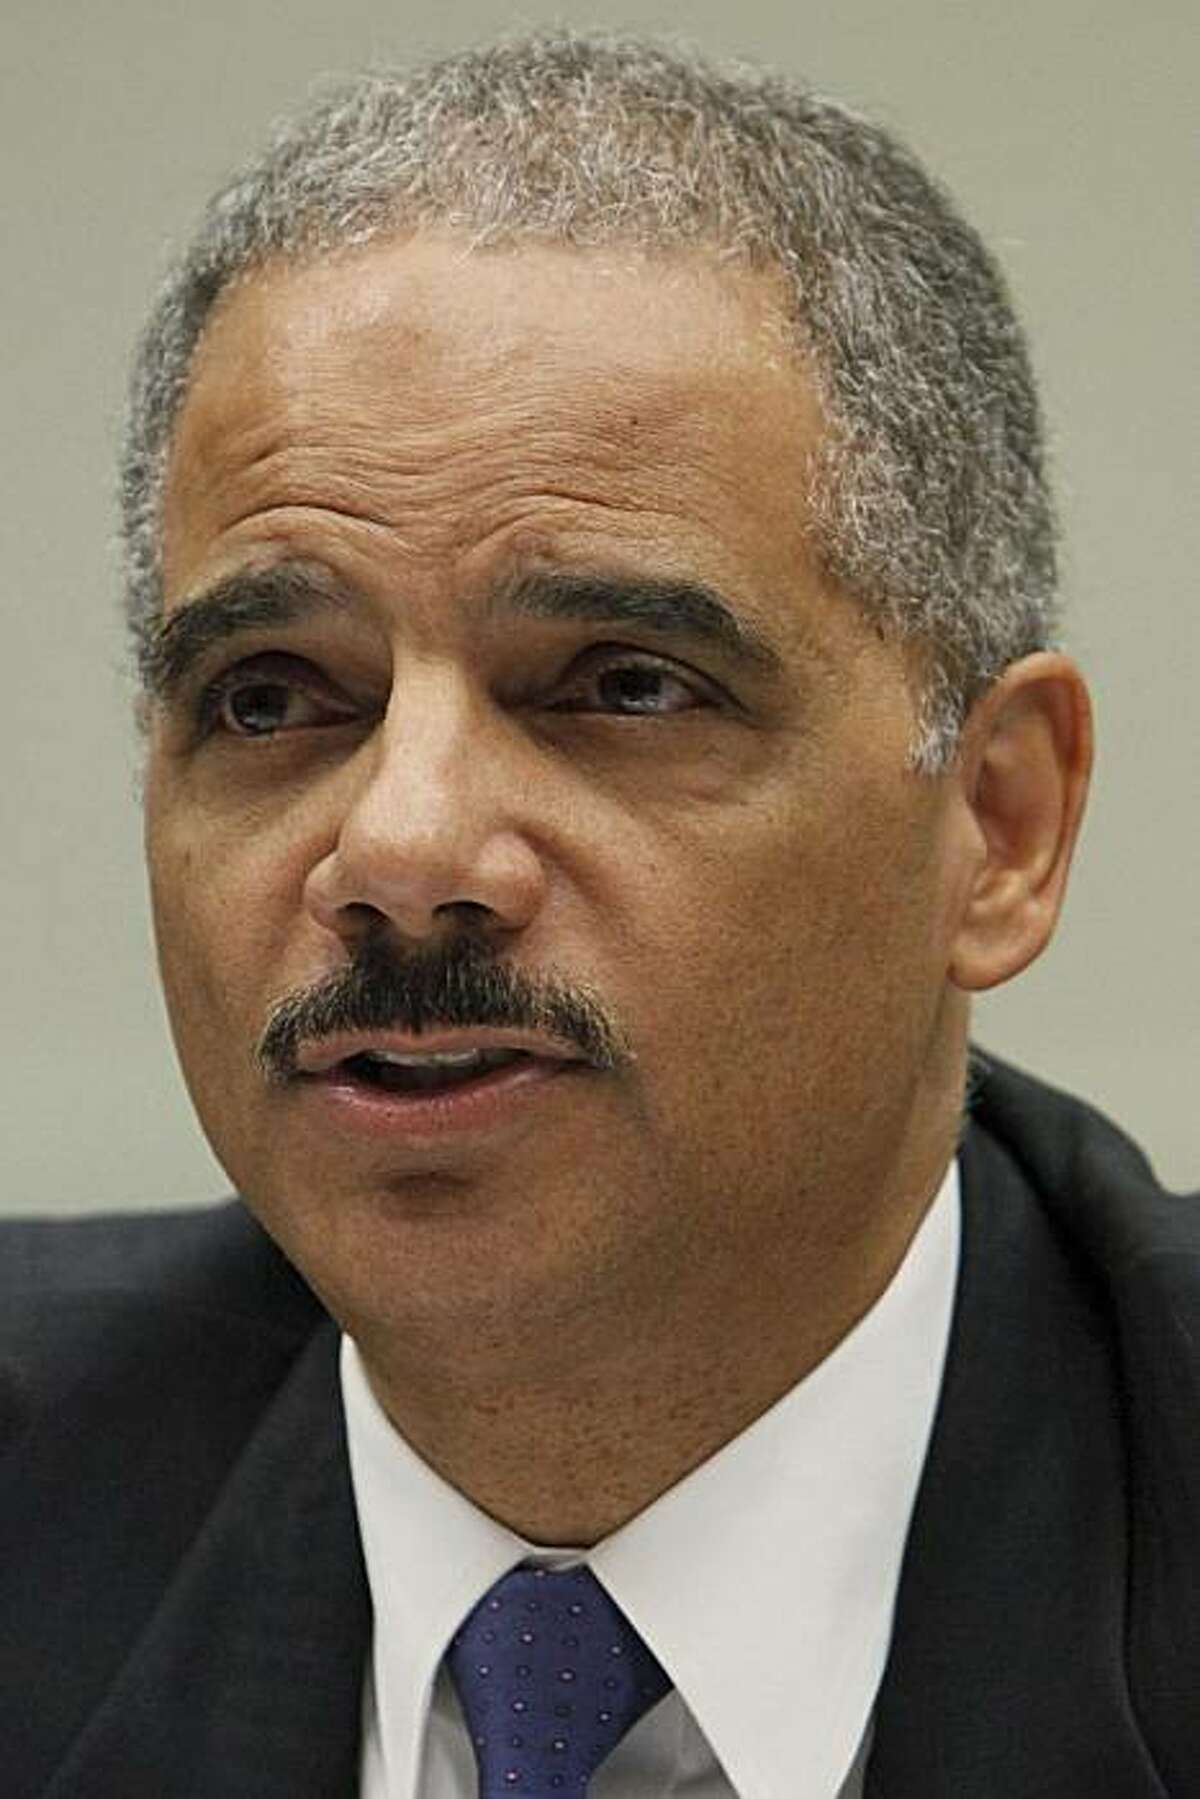 Attorney General Eric Holder in this May 13, 2010 photo on Capitol Hill in Washington.